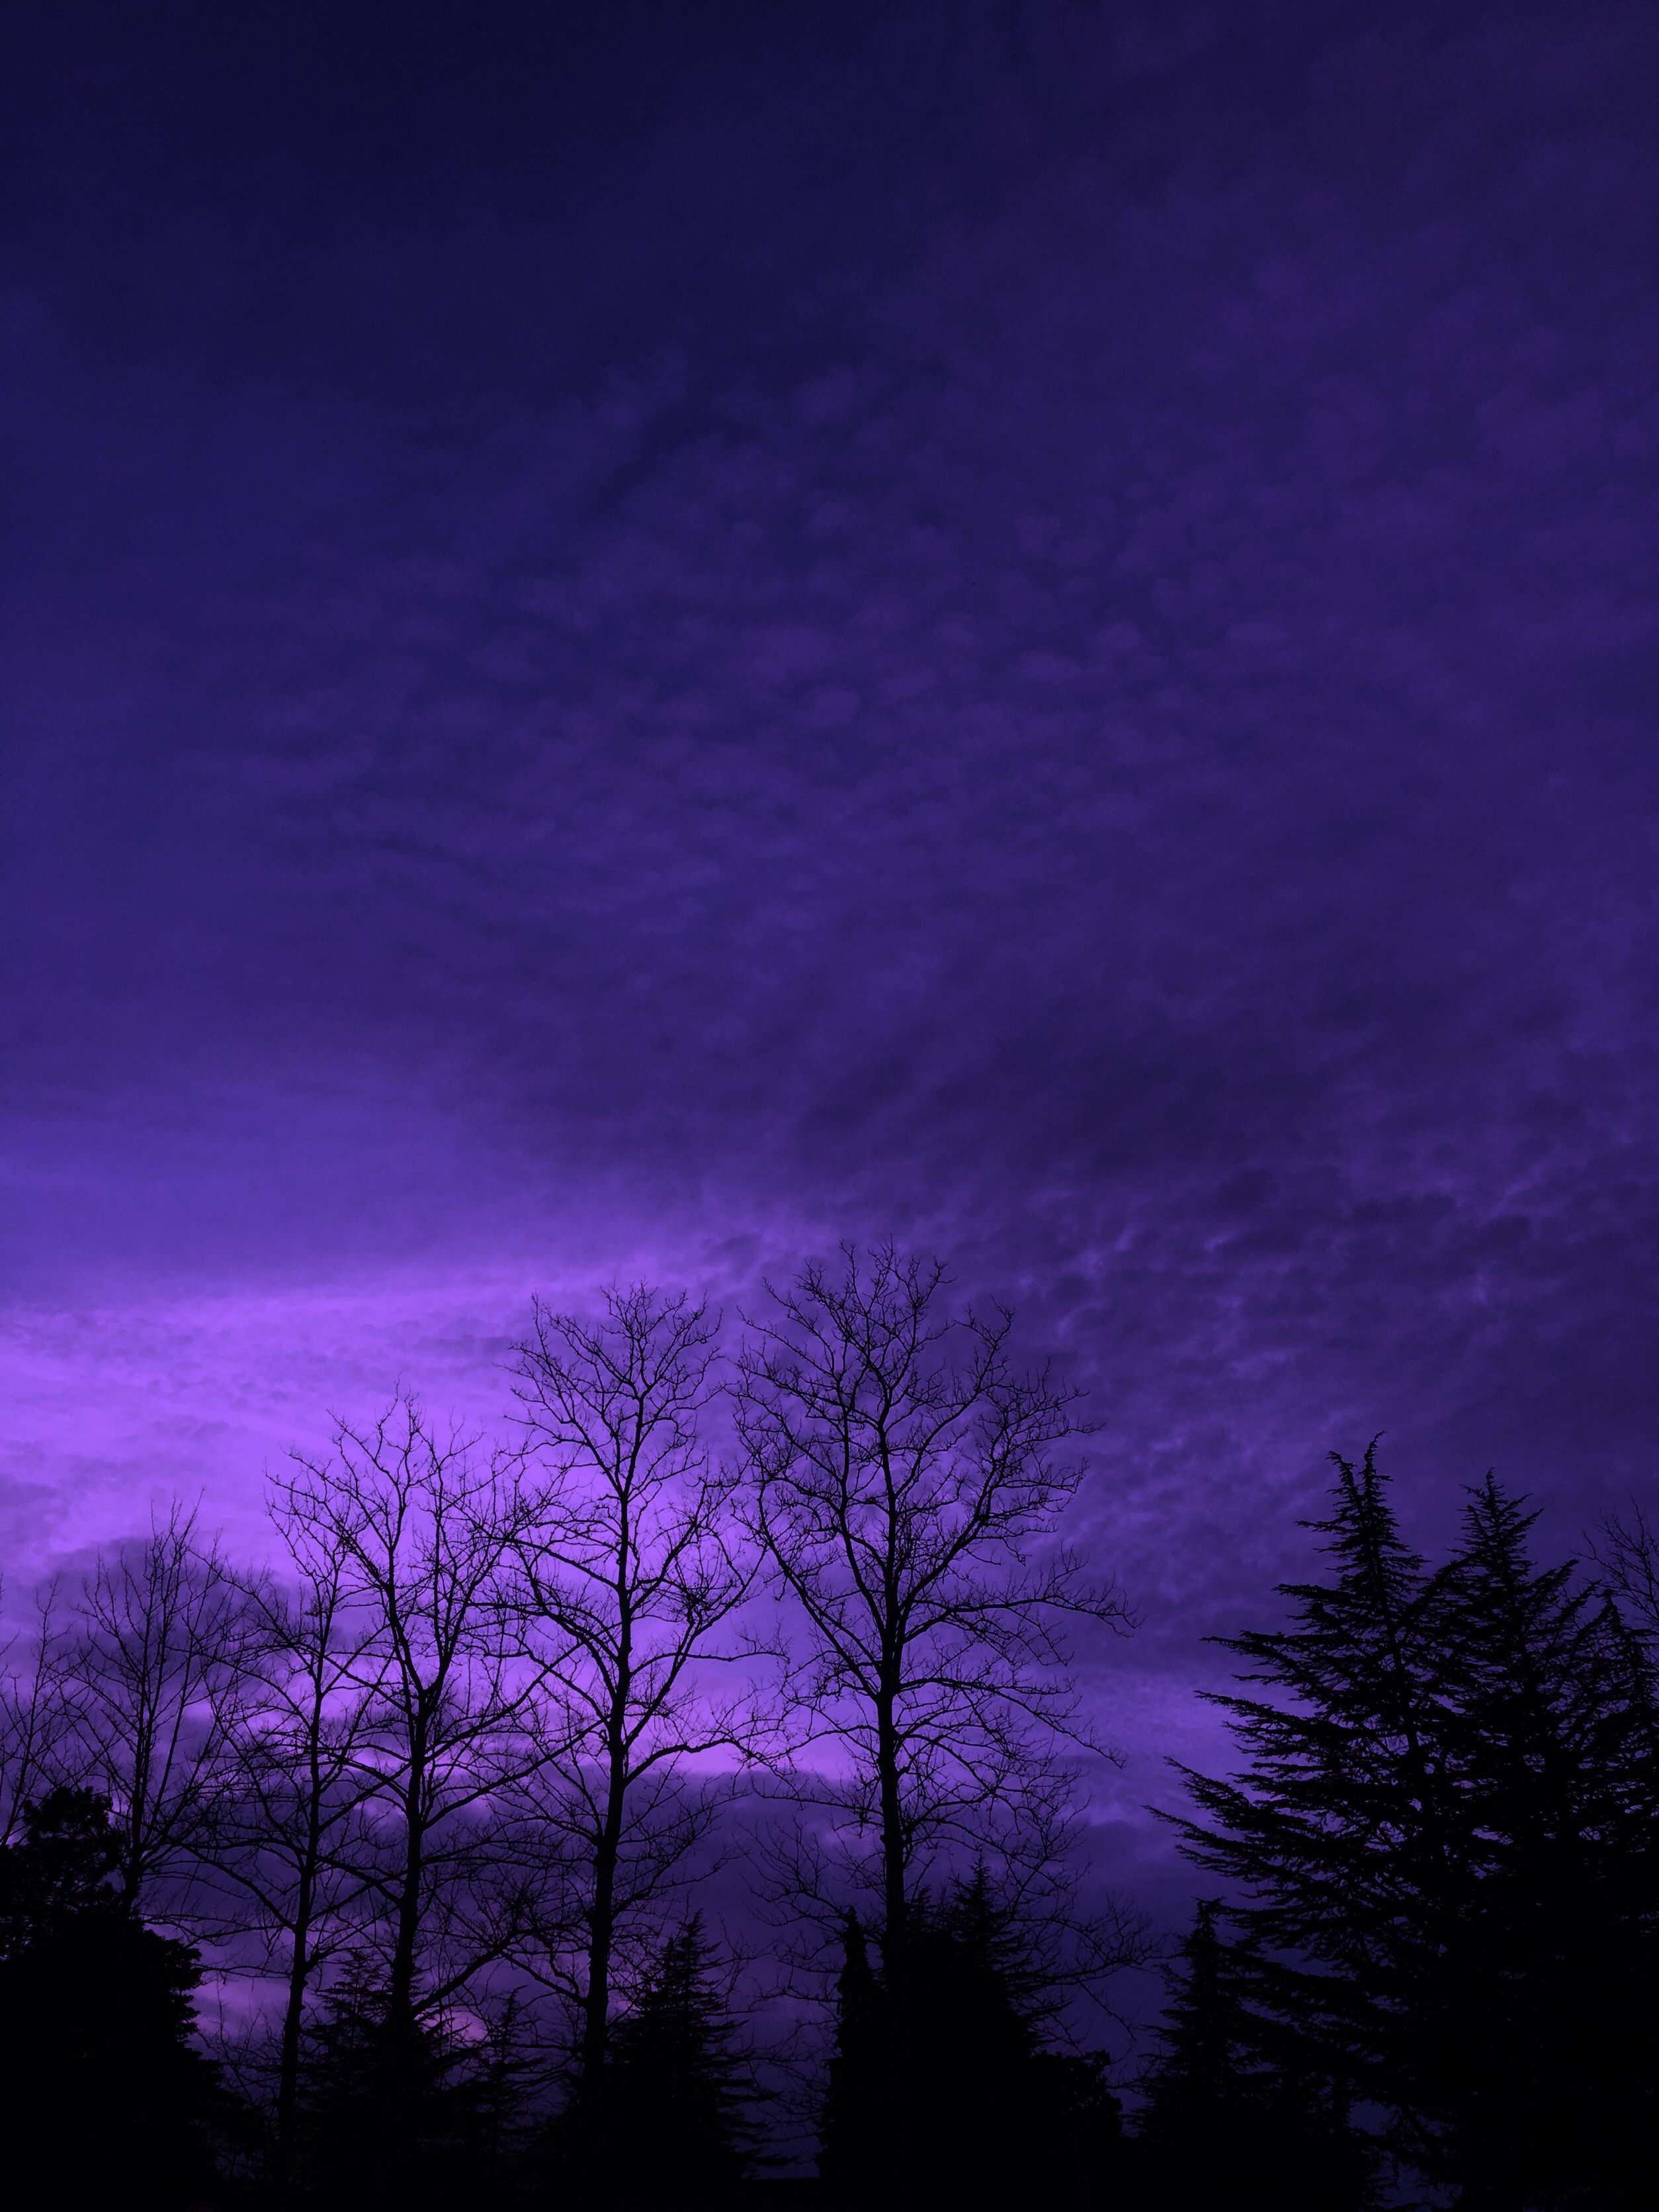 A purple sky with trees in the foreground. - Nature, violet